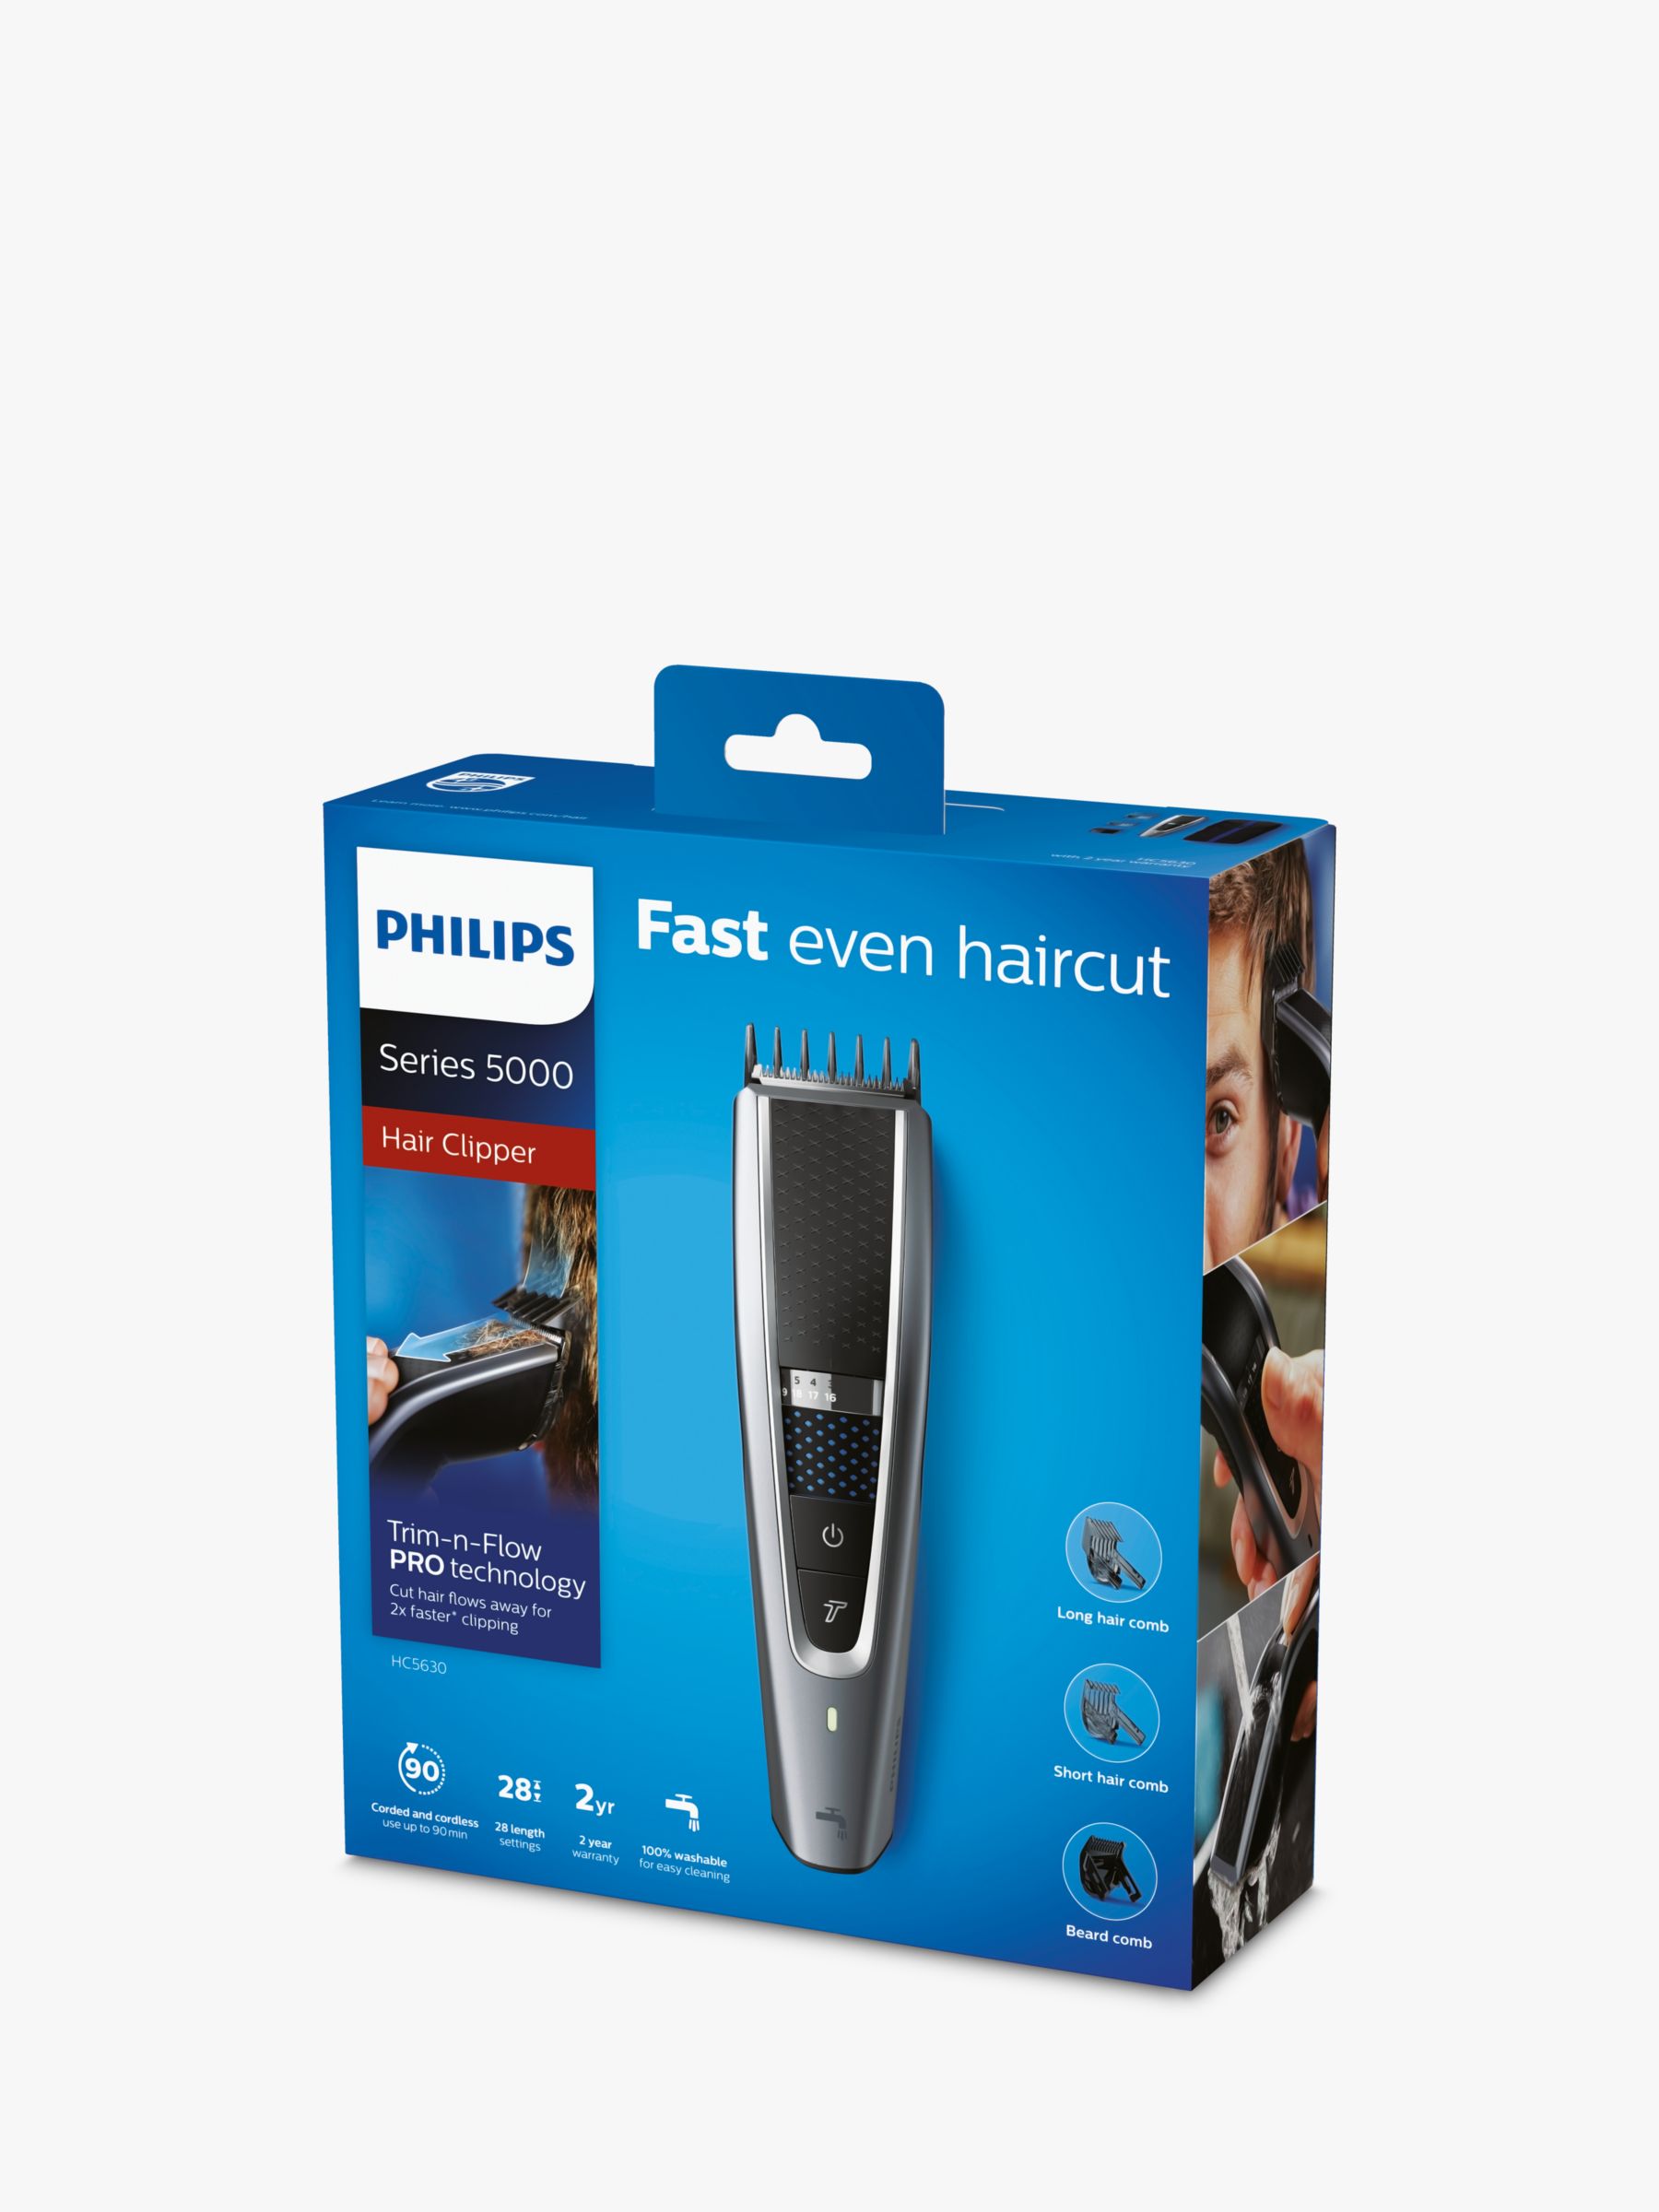 philips 5632 hair clippers